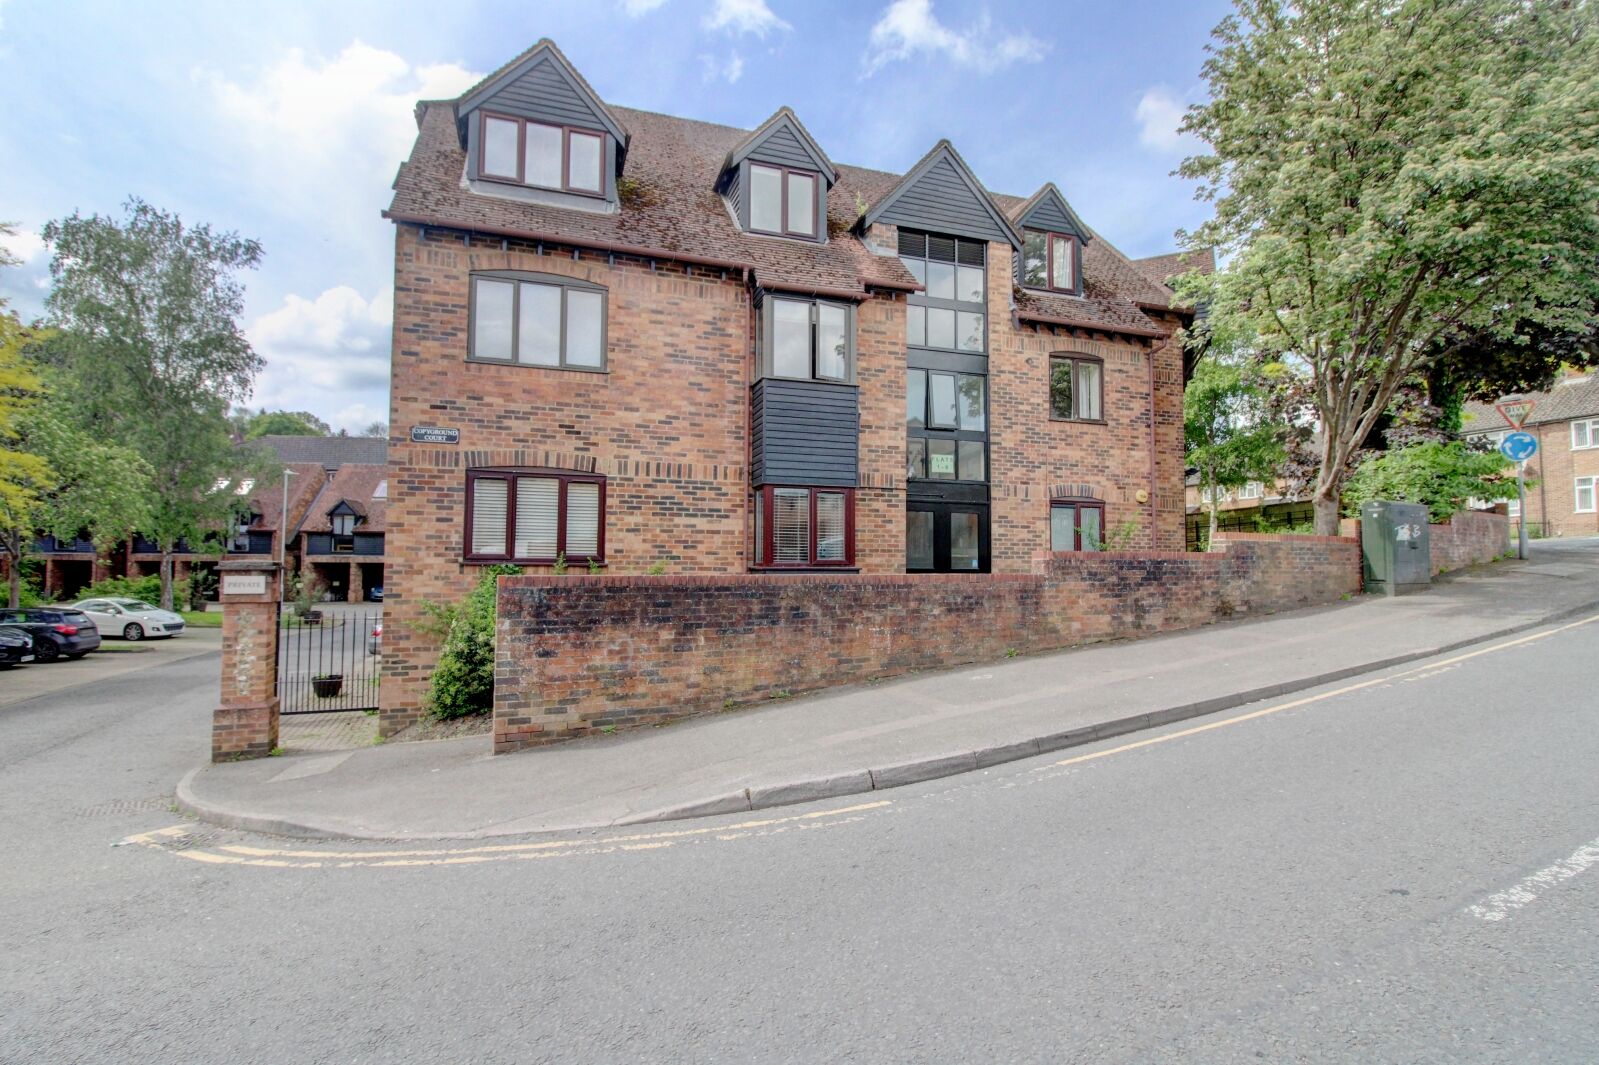 2 bedroom  flat for sale Copyground Lane, High Wycombe, HP12, main image